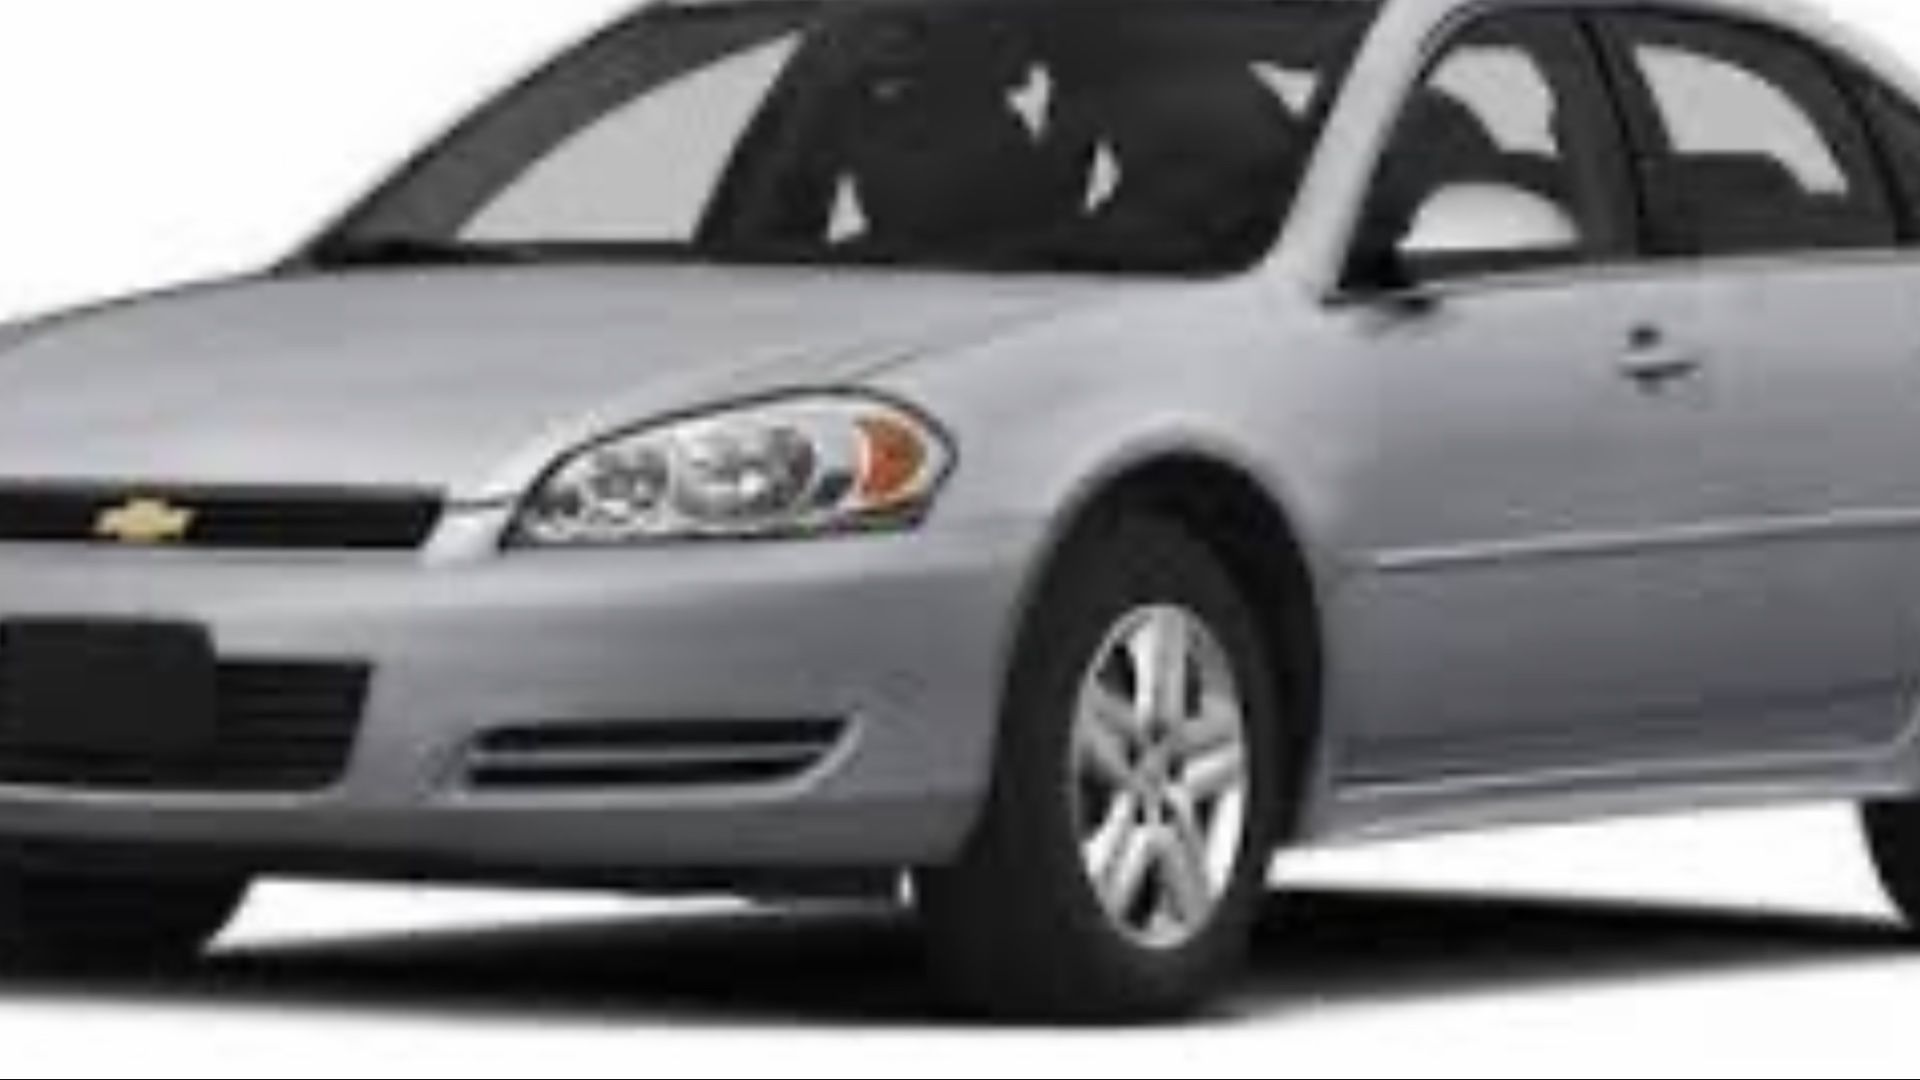 2006-2016 Chevy Impala Parts Available - Complete Car - V6 Engine - Automatic